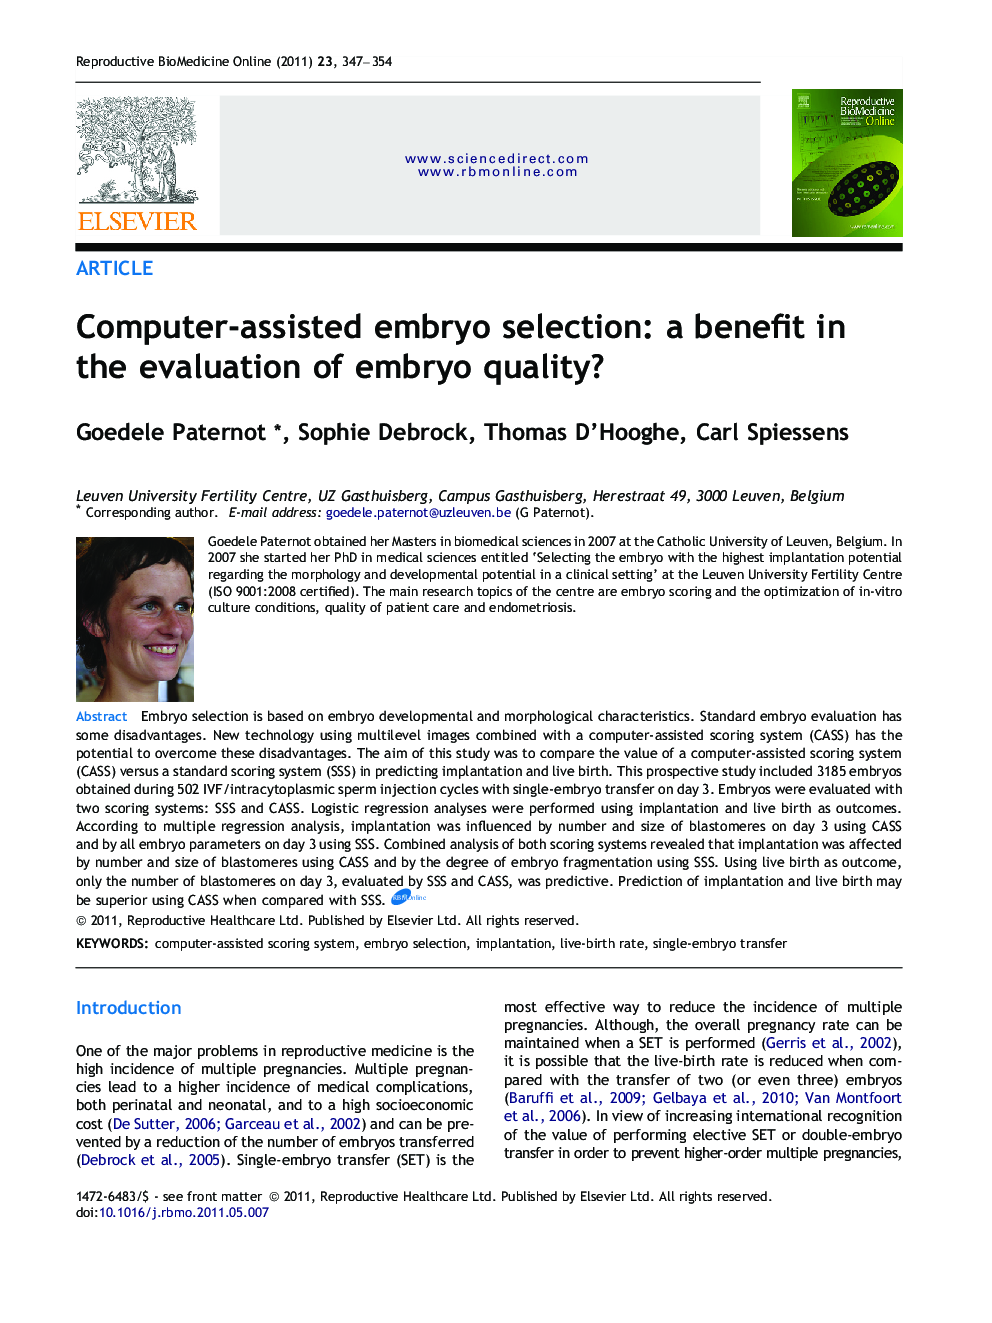 Computer-assisted embryo selection: a benefit in the evaluation of embryo quality? 